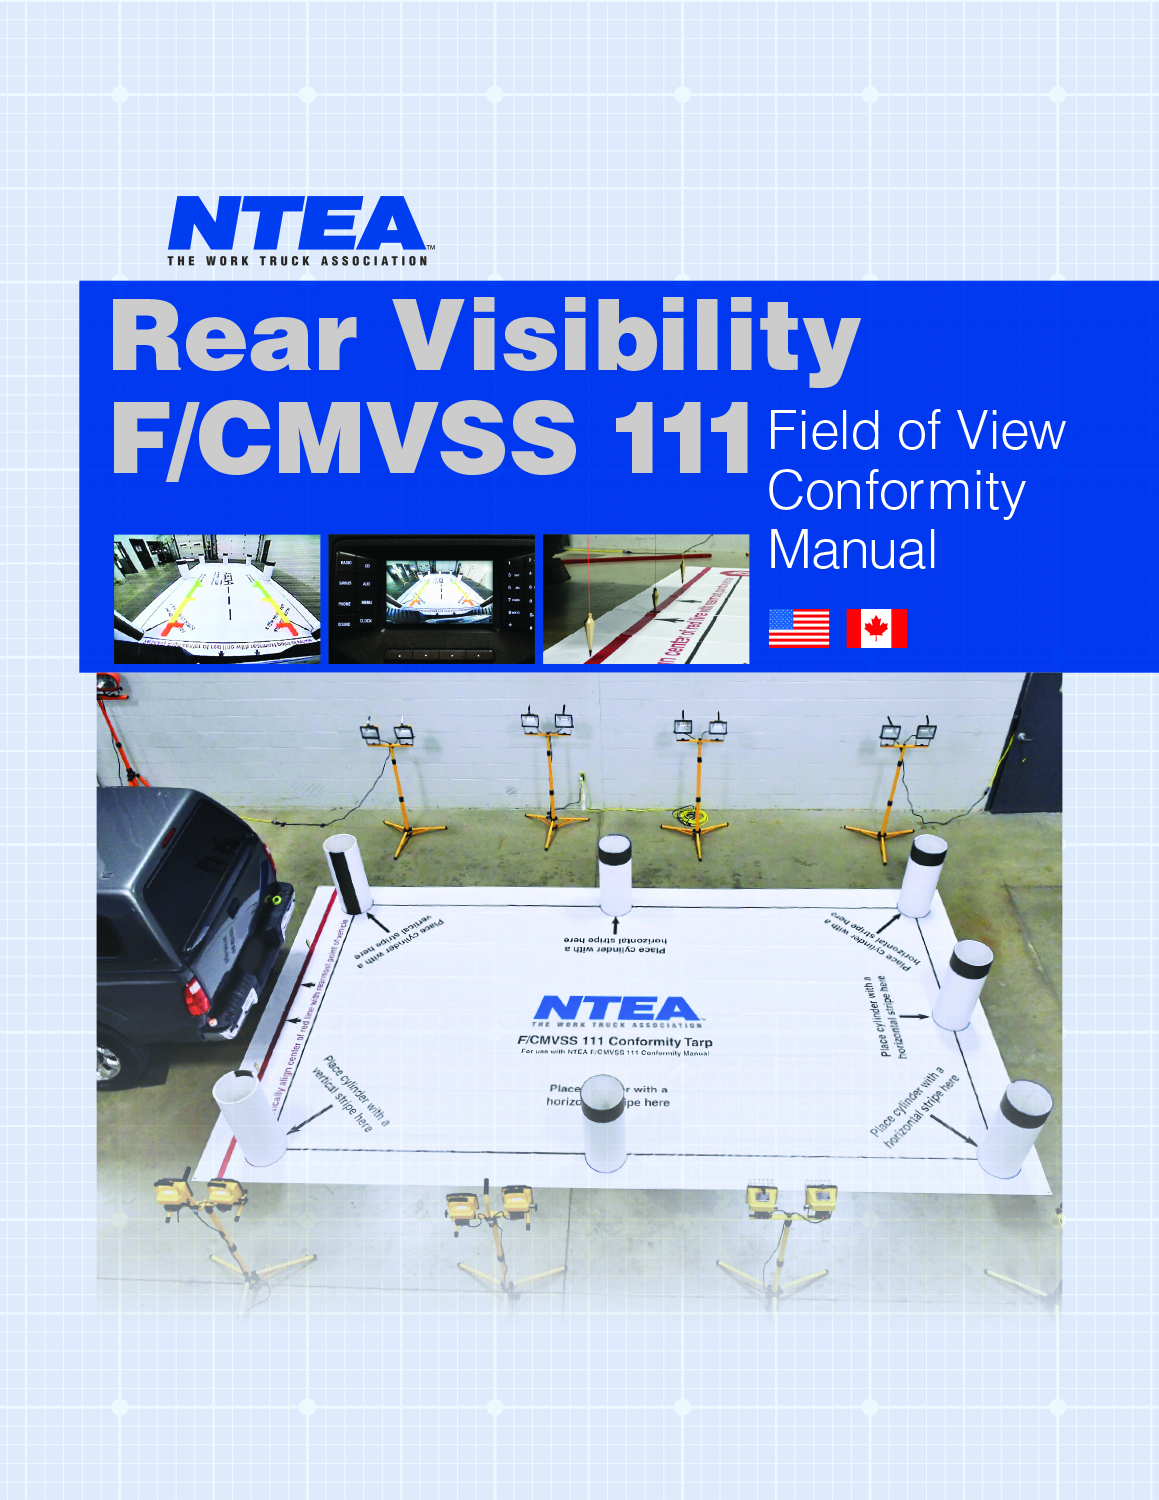 Rear Visibility F/CMVSS 111 Field of View Conformity Manual